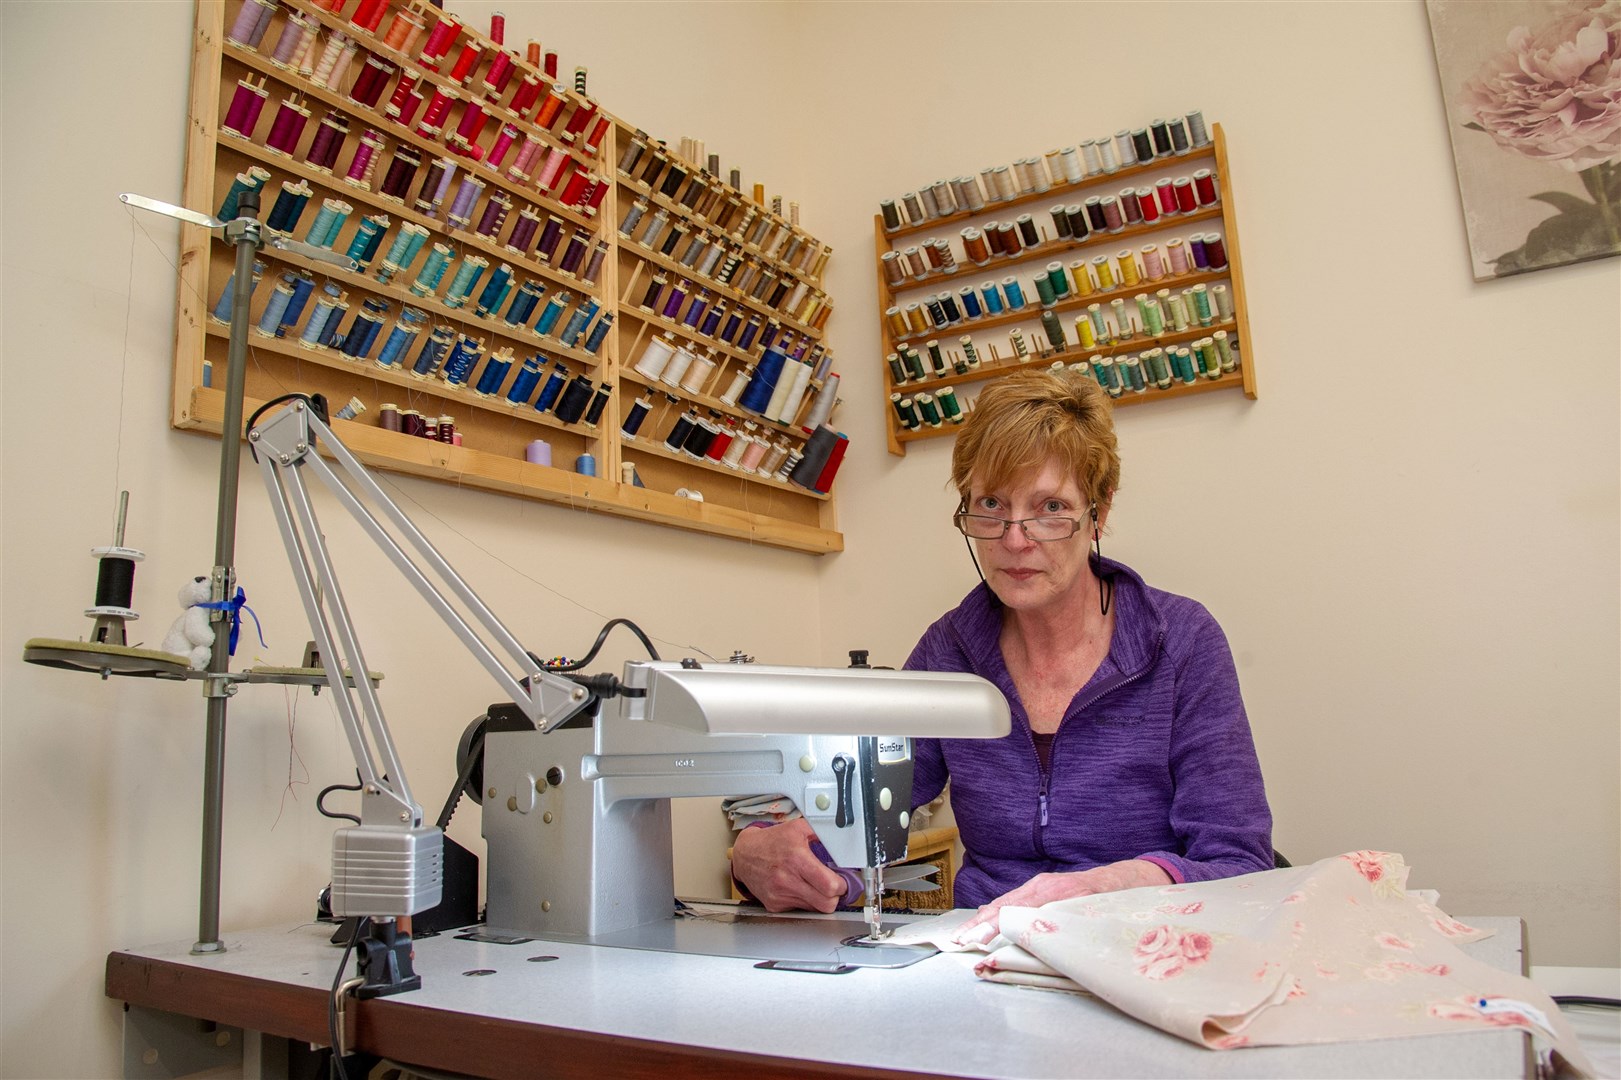 Lindsey Wyllie, who runs an alterations and sewing business based at Unique Ladieswear in Lossiemouth, is co-leading a hardworking volunteer team as part of Moray Scrubs' co-ordinated effort. Picture: Daniel Forsyth.